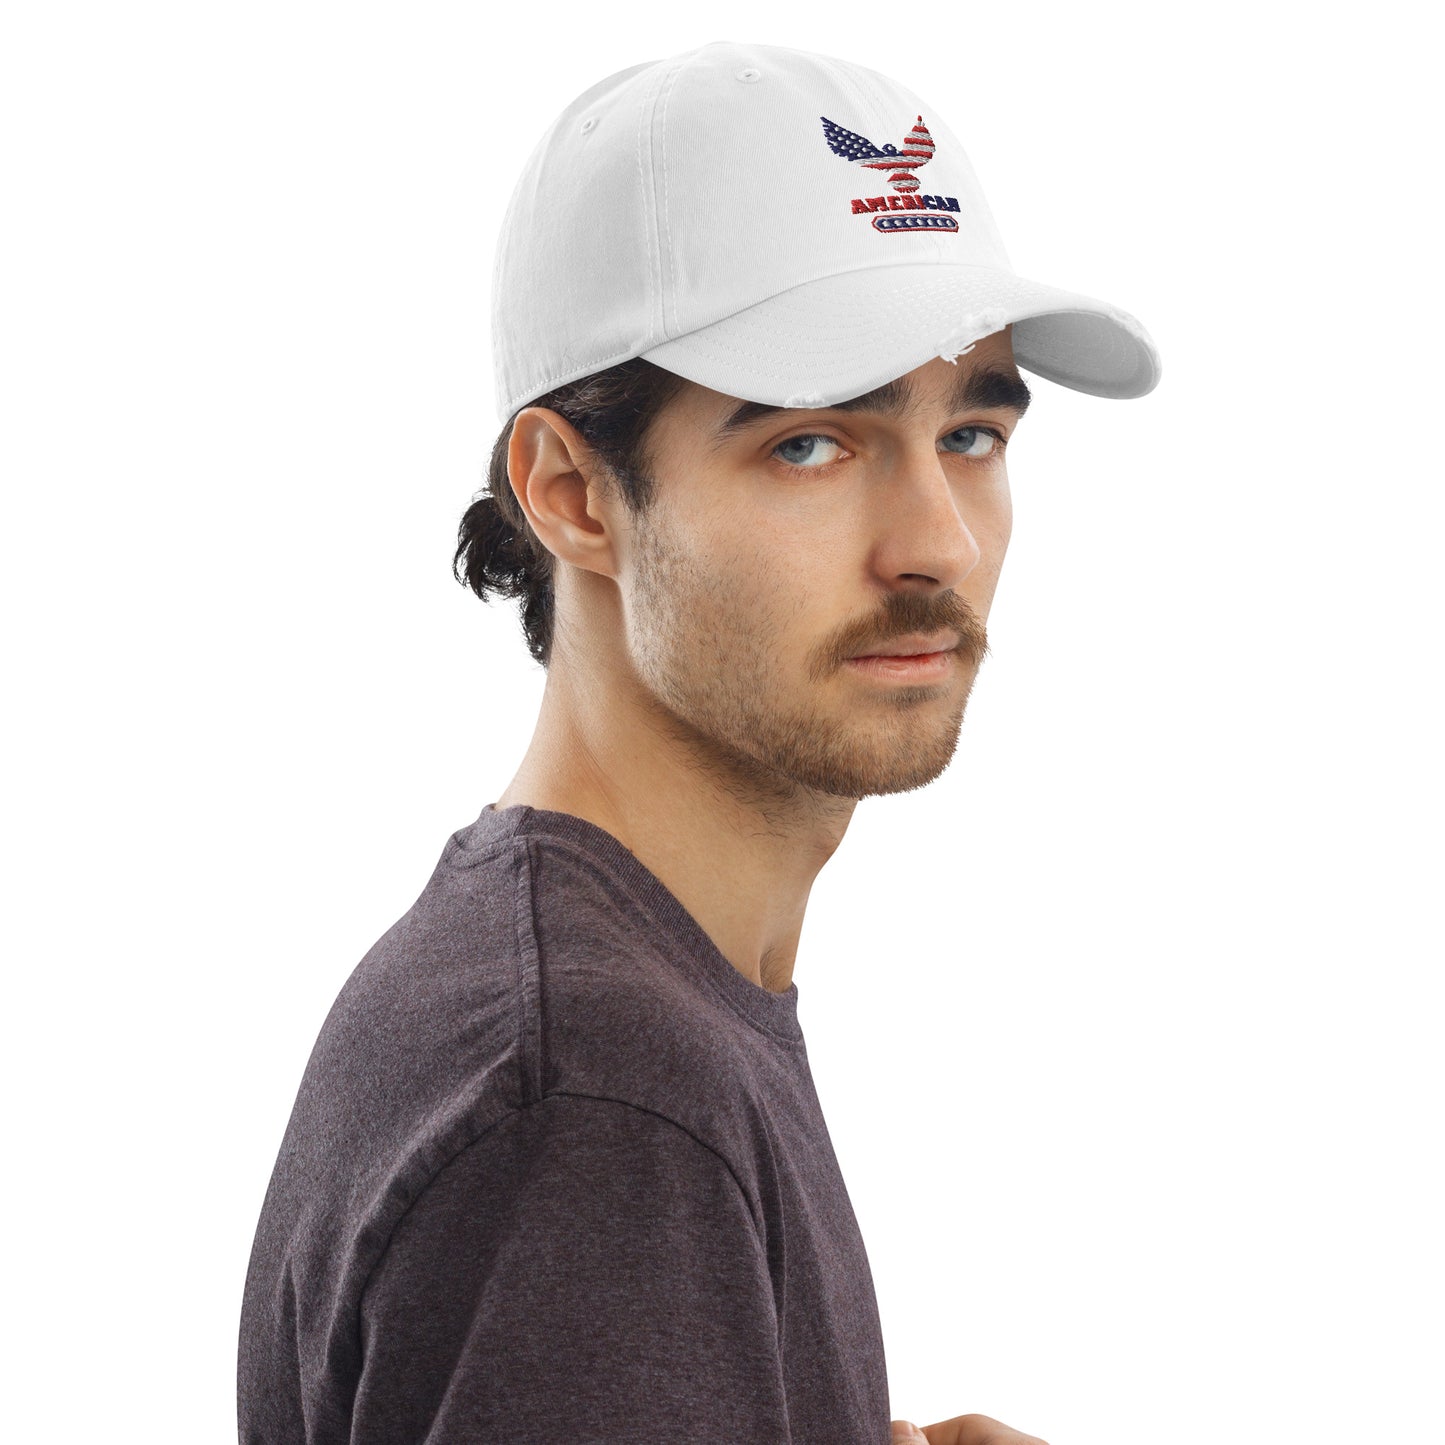 PATRIOTIC AMERICAN STYLE BASEBALL CAP WHITE RIGHT FRONT - www.firstamericanstore.com